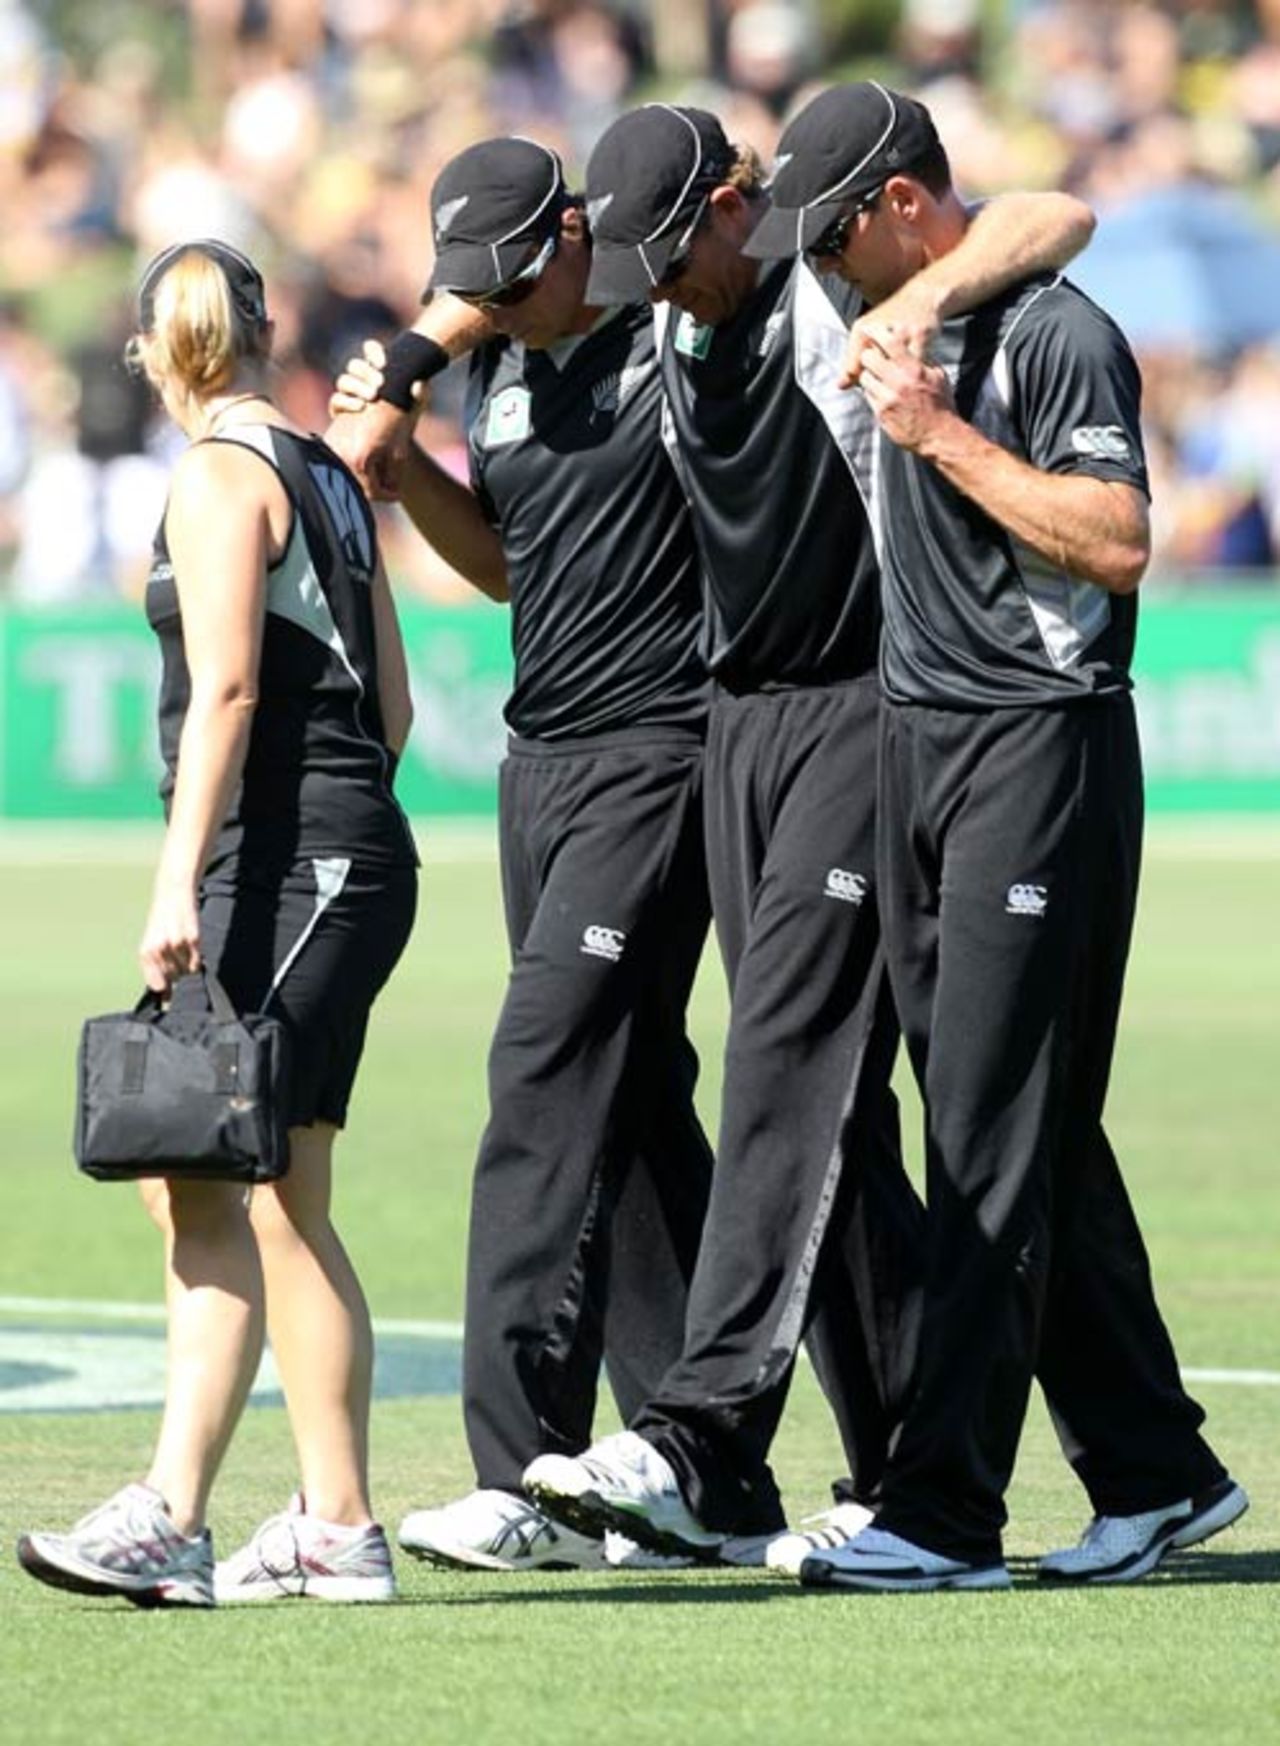 Jacob Oram is helped from the field after hurting his left knee, New Zealand v Australia, 1st ODI, Napier, March 3, 2010